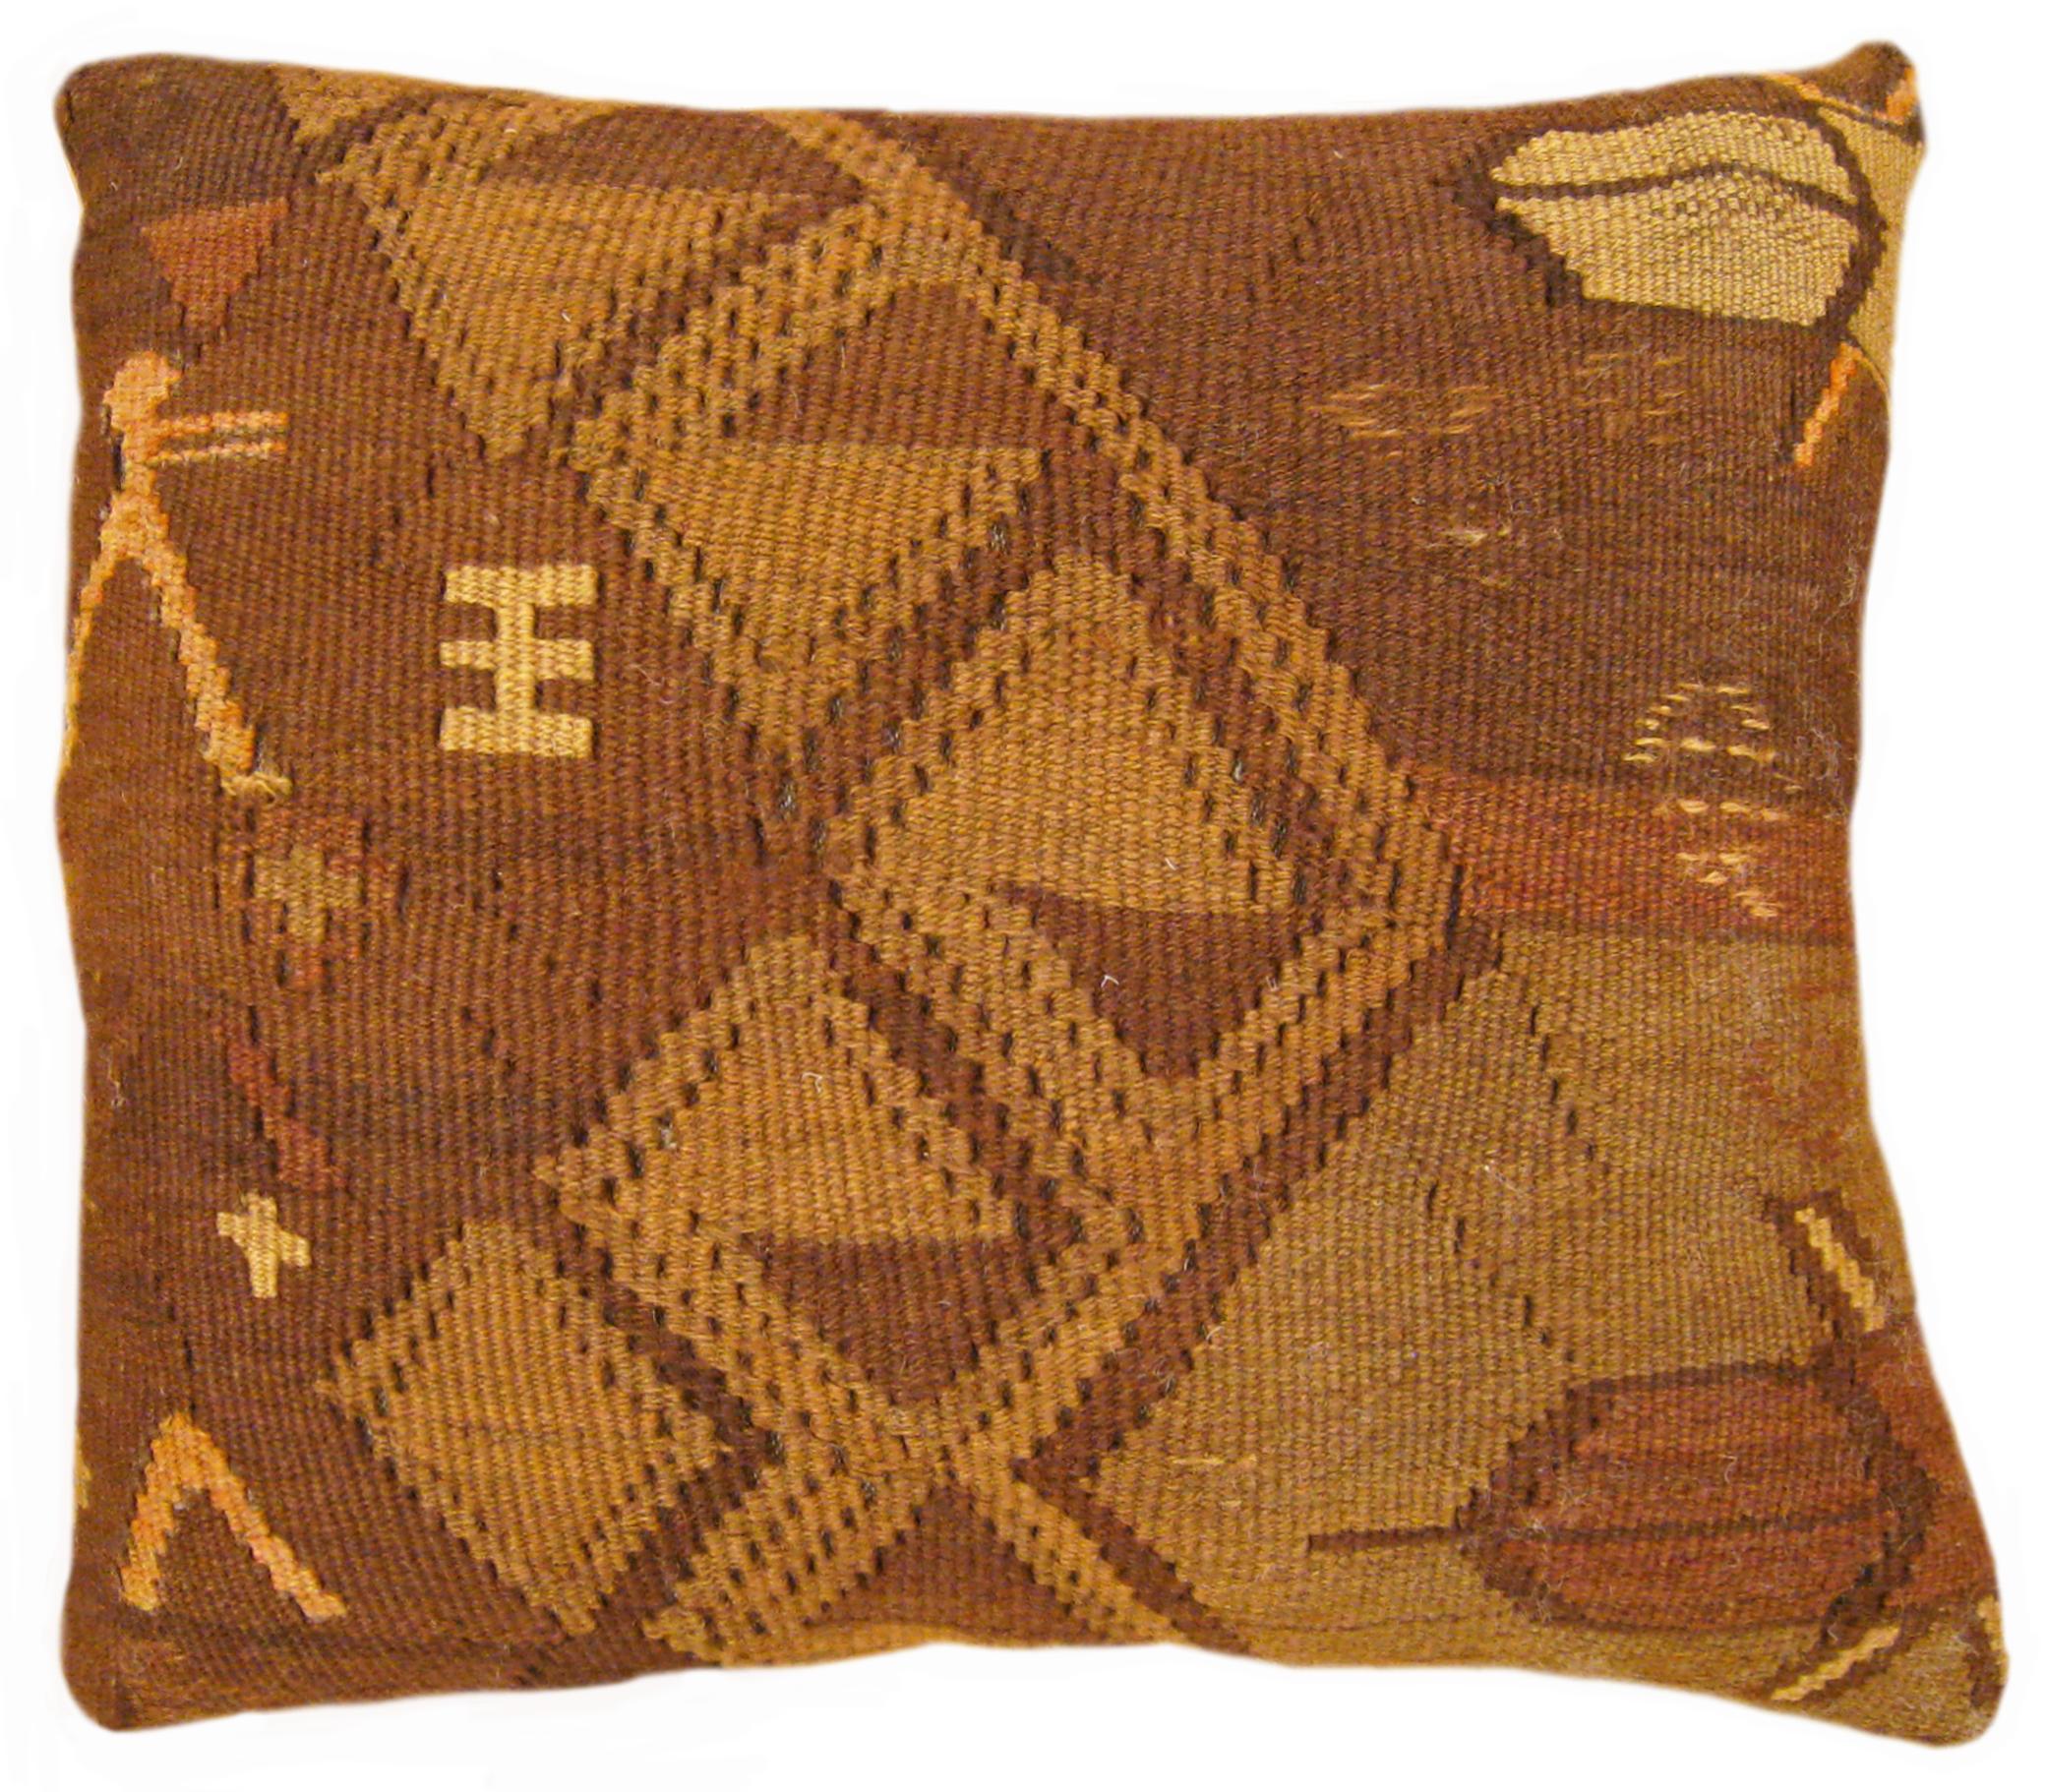 A Set of Decorative Vintage Turkish Kilim Pillows with Geometric Abstracts For Sale 5